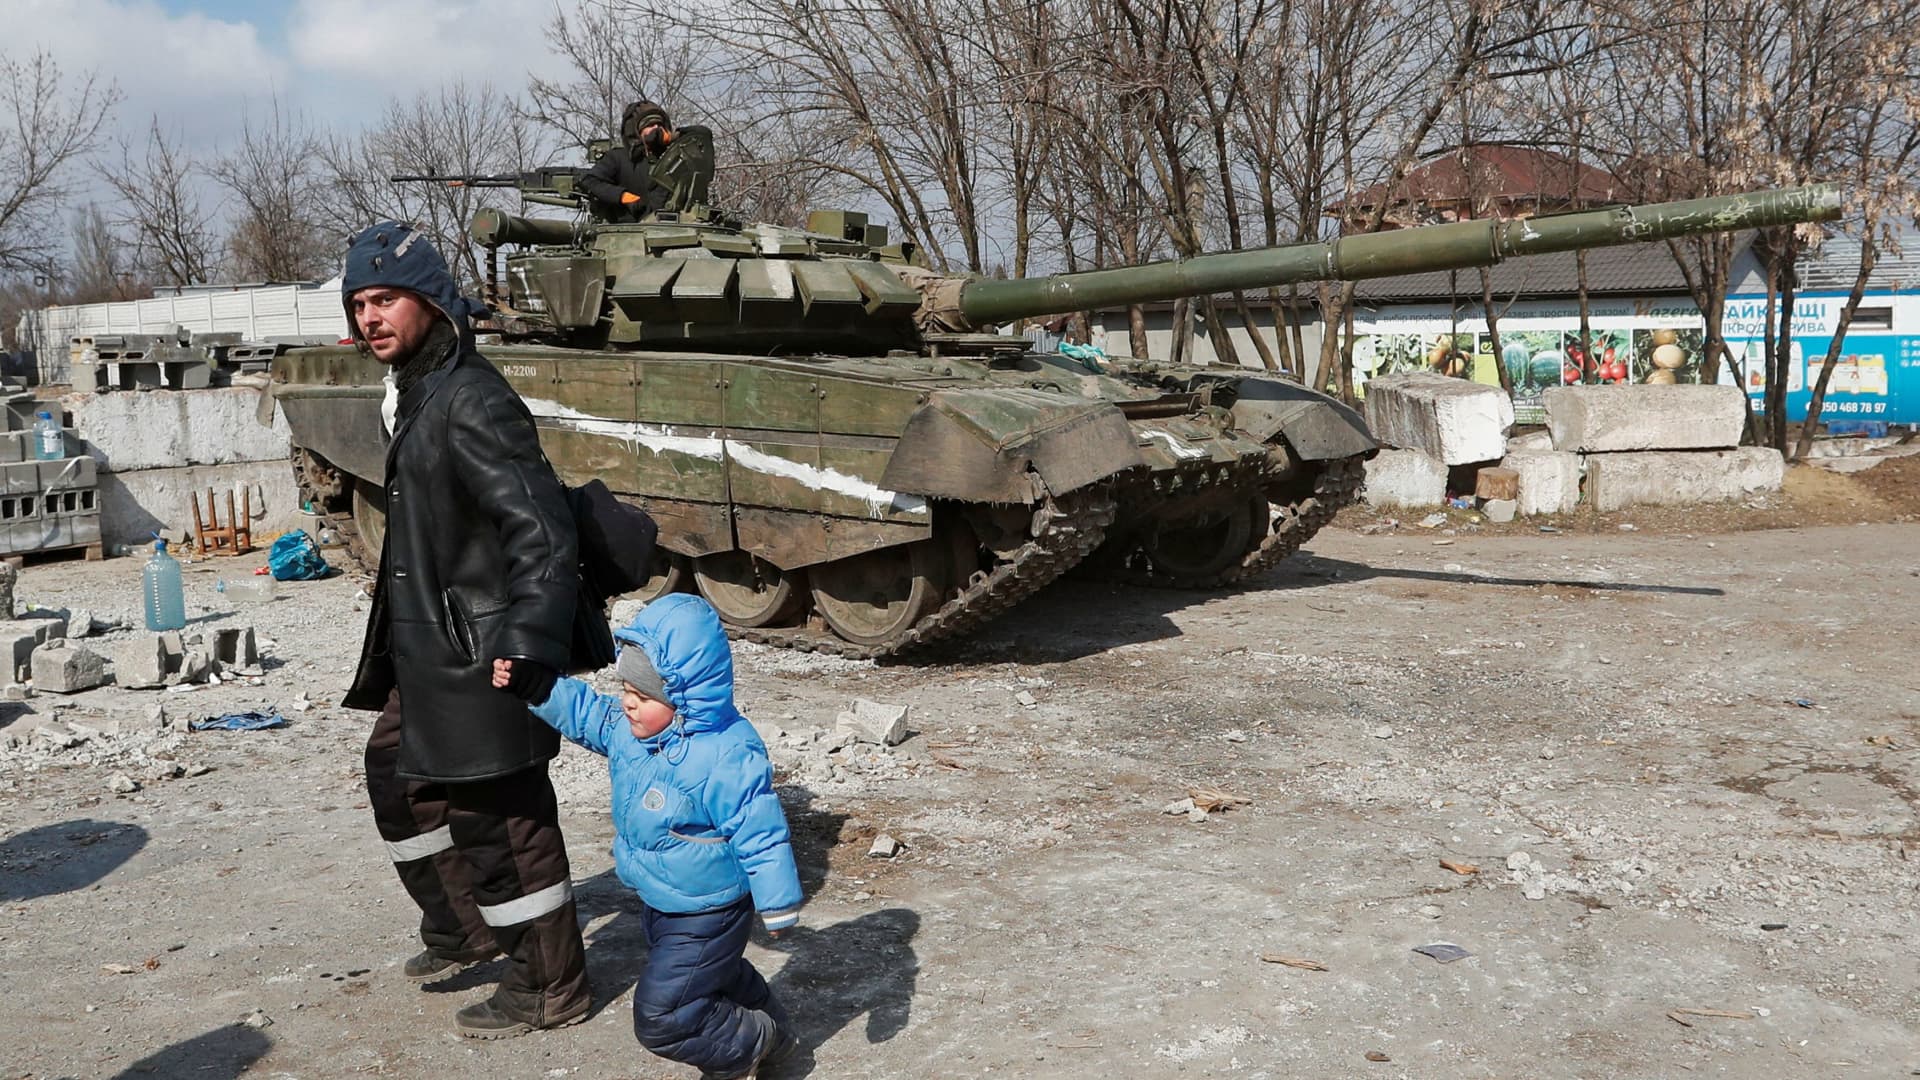 A local resident walks with a child past a tank of pro-Russian troops during Ukraine-Russia conflict in the besieged southern port city of Mariupol, Ukraine March 18, 2022.